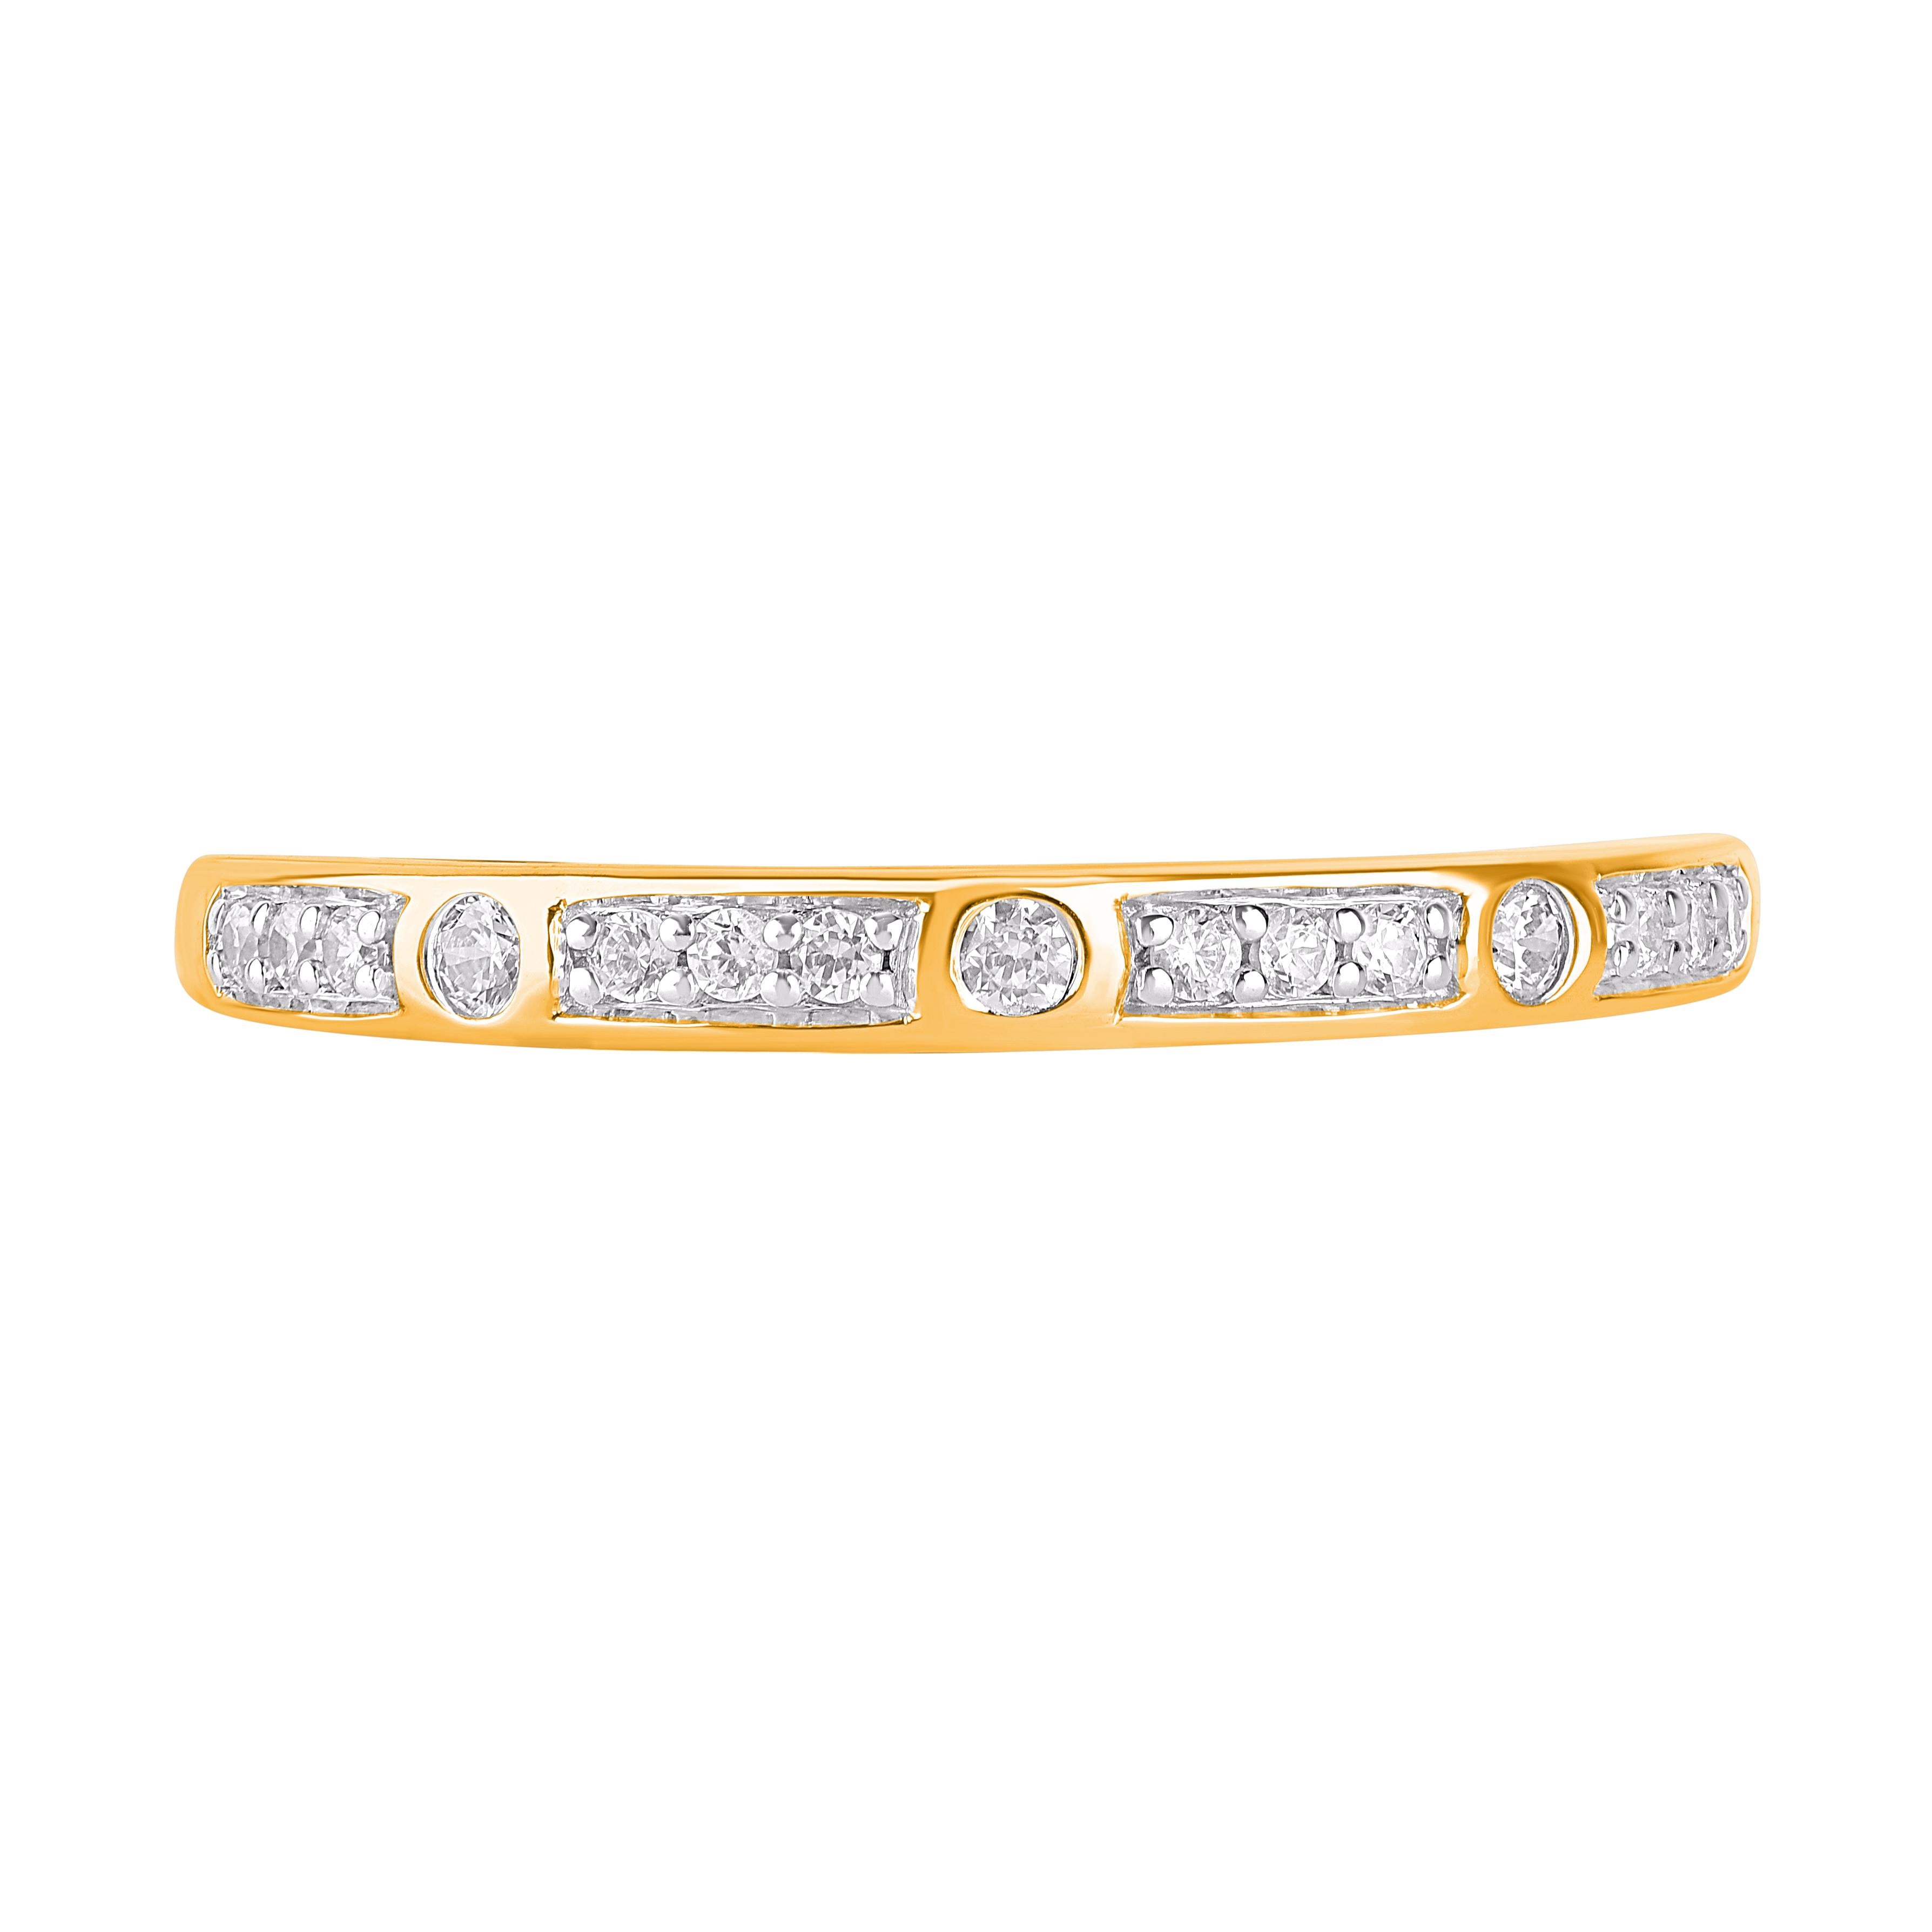 Honor your special day with this exceptional diamond band ring. These band ring are studded with 15 brilliant cut natural diamonds in 14 karat yellow gold in pave and bezel setting . Total diamond weight is 0.15 carat. The white diamonds are graded